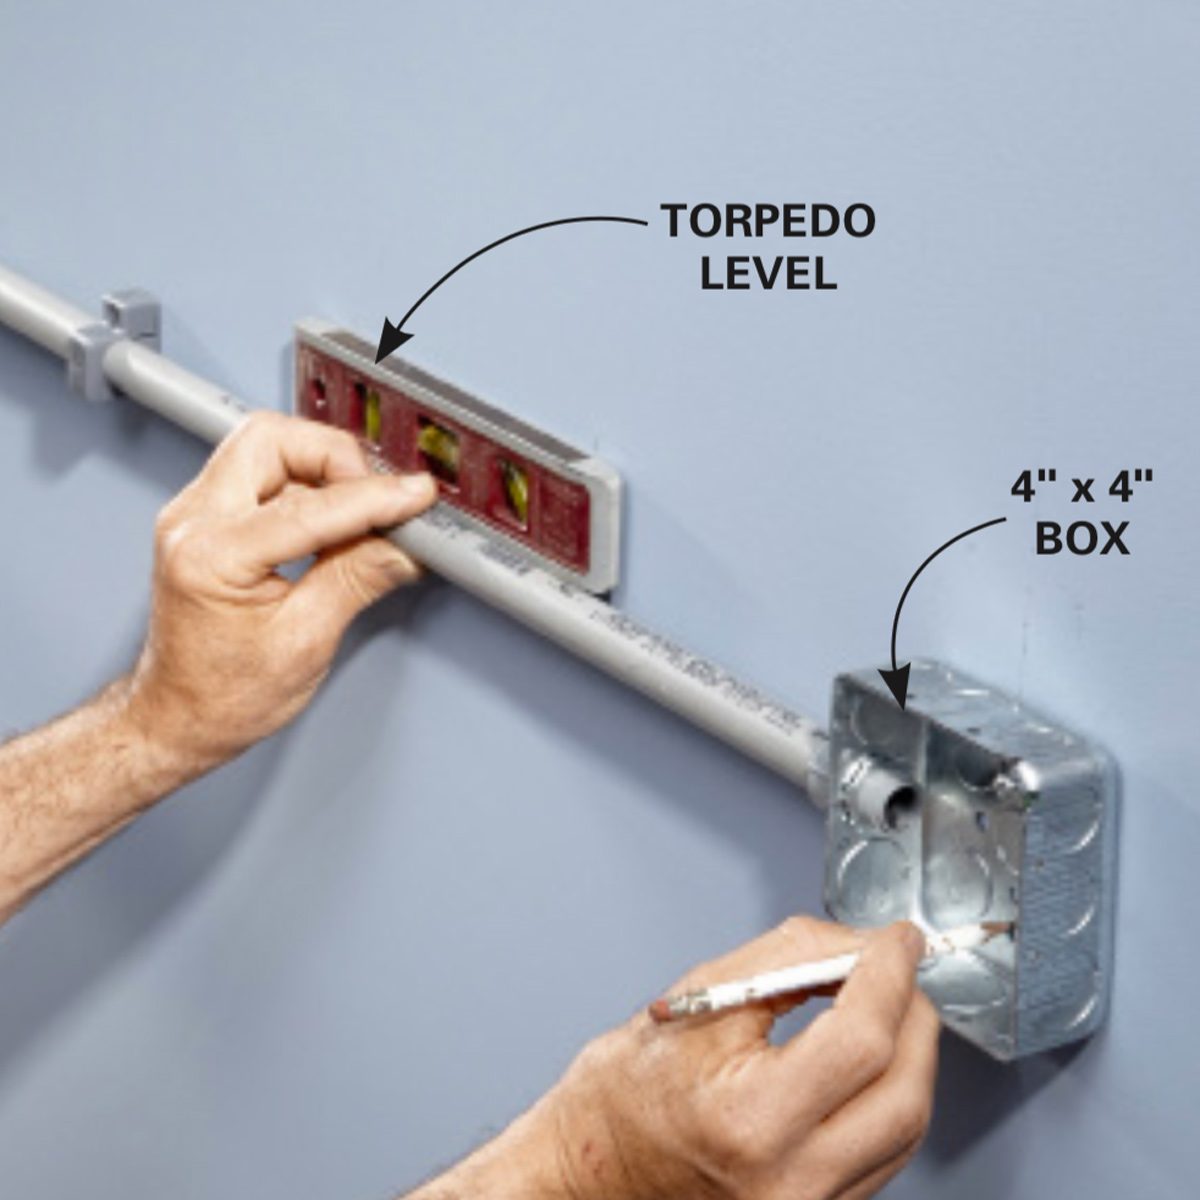 Mounting a new electrical box in garage